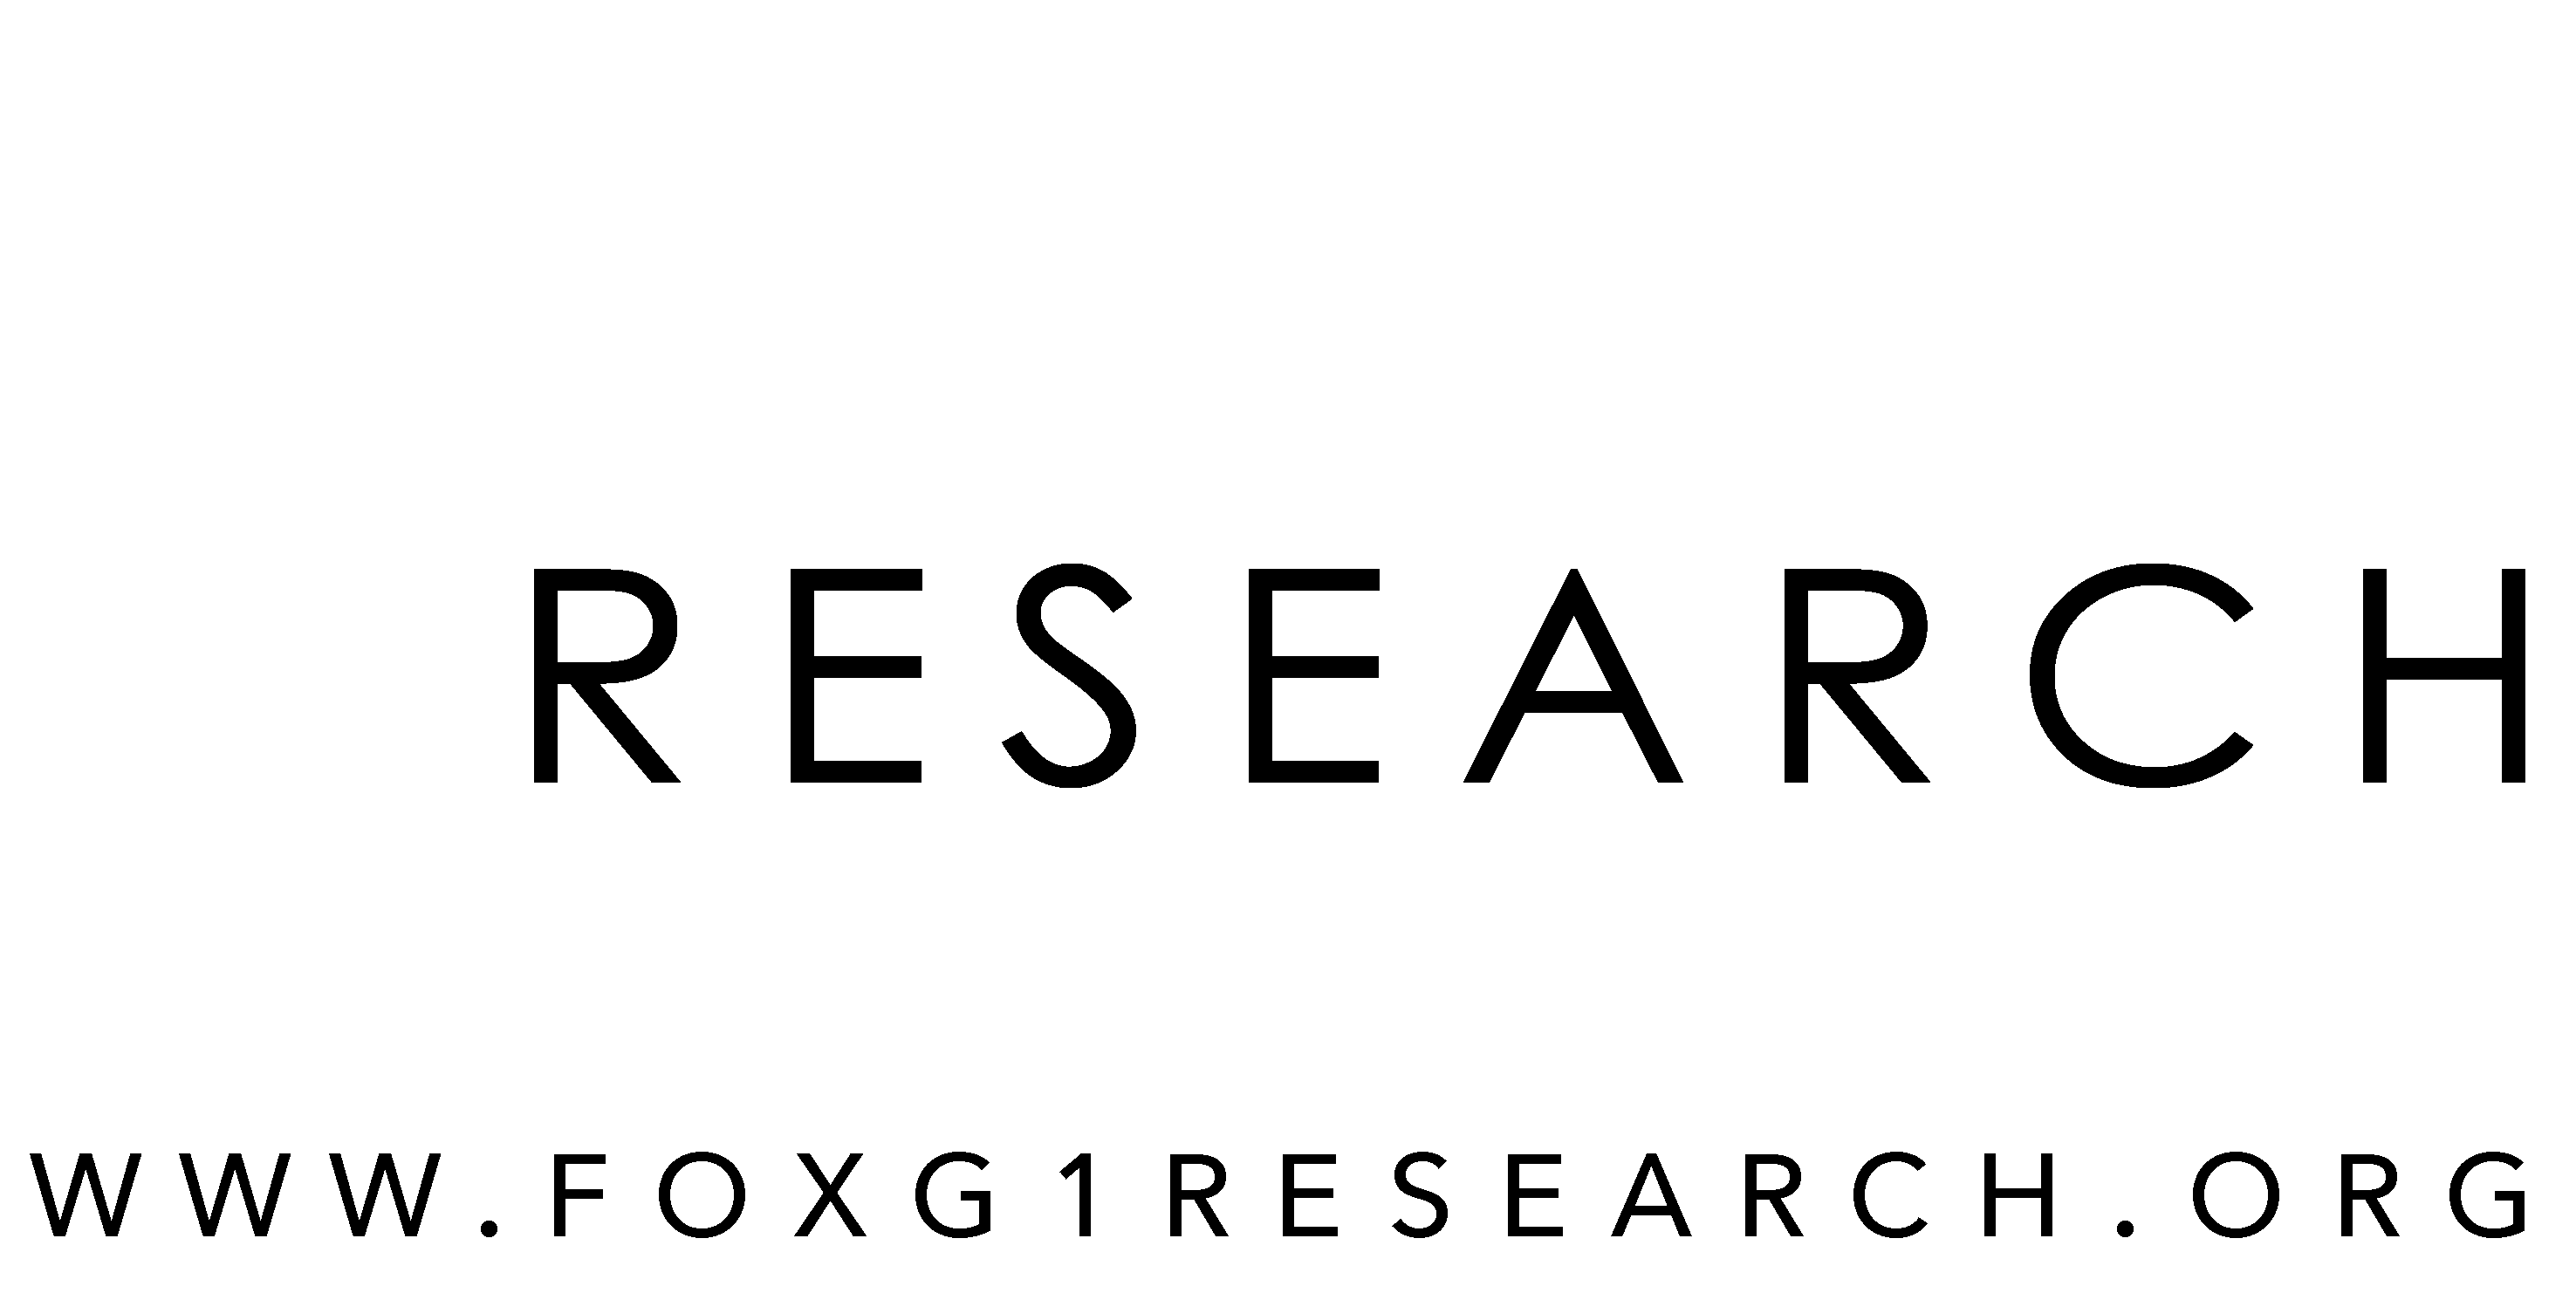 FOXG1 Research Foundation Store